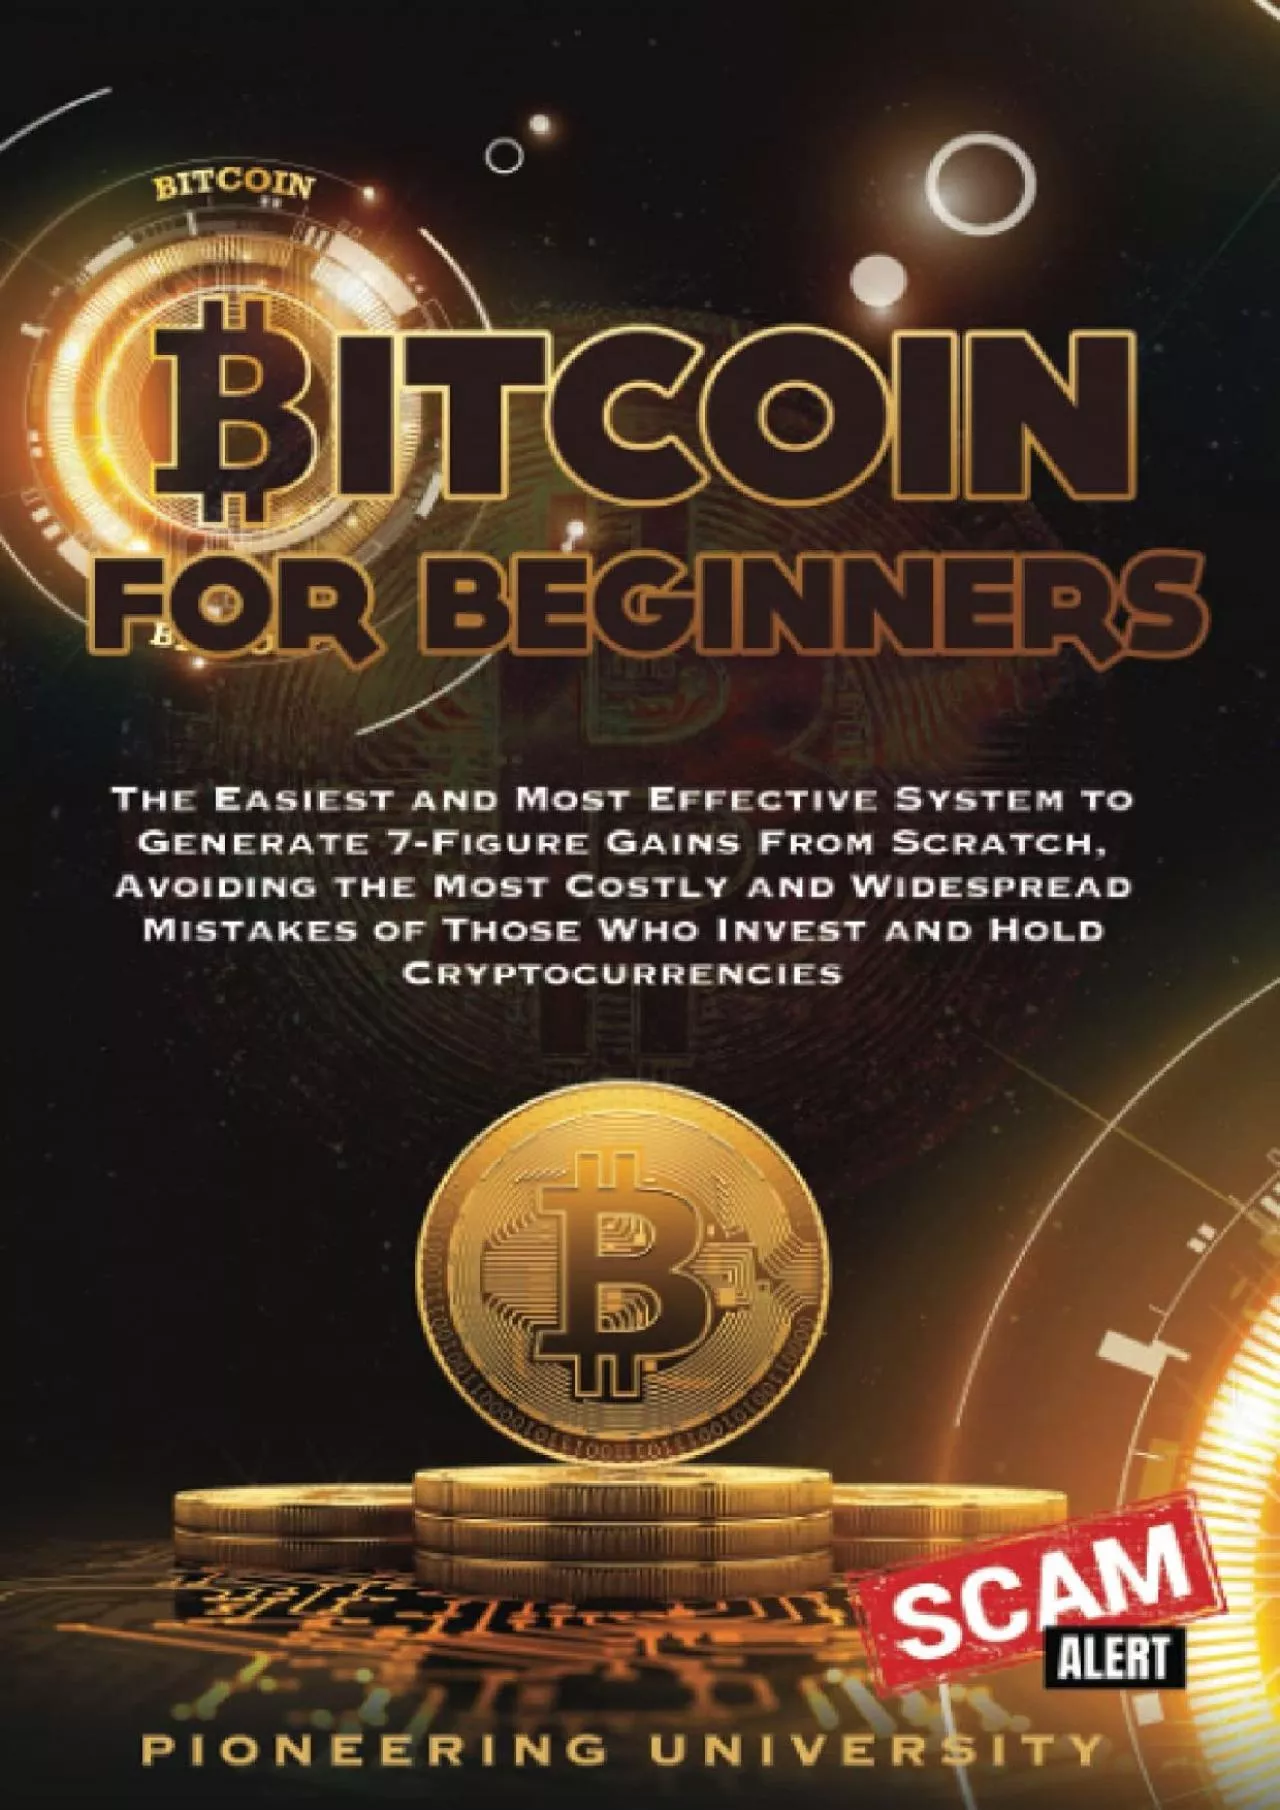 [FREE]-Bitcoin for beginners: The Easiest and Most Effective System to Generate 7-Figure